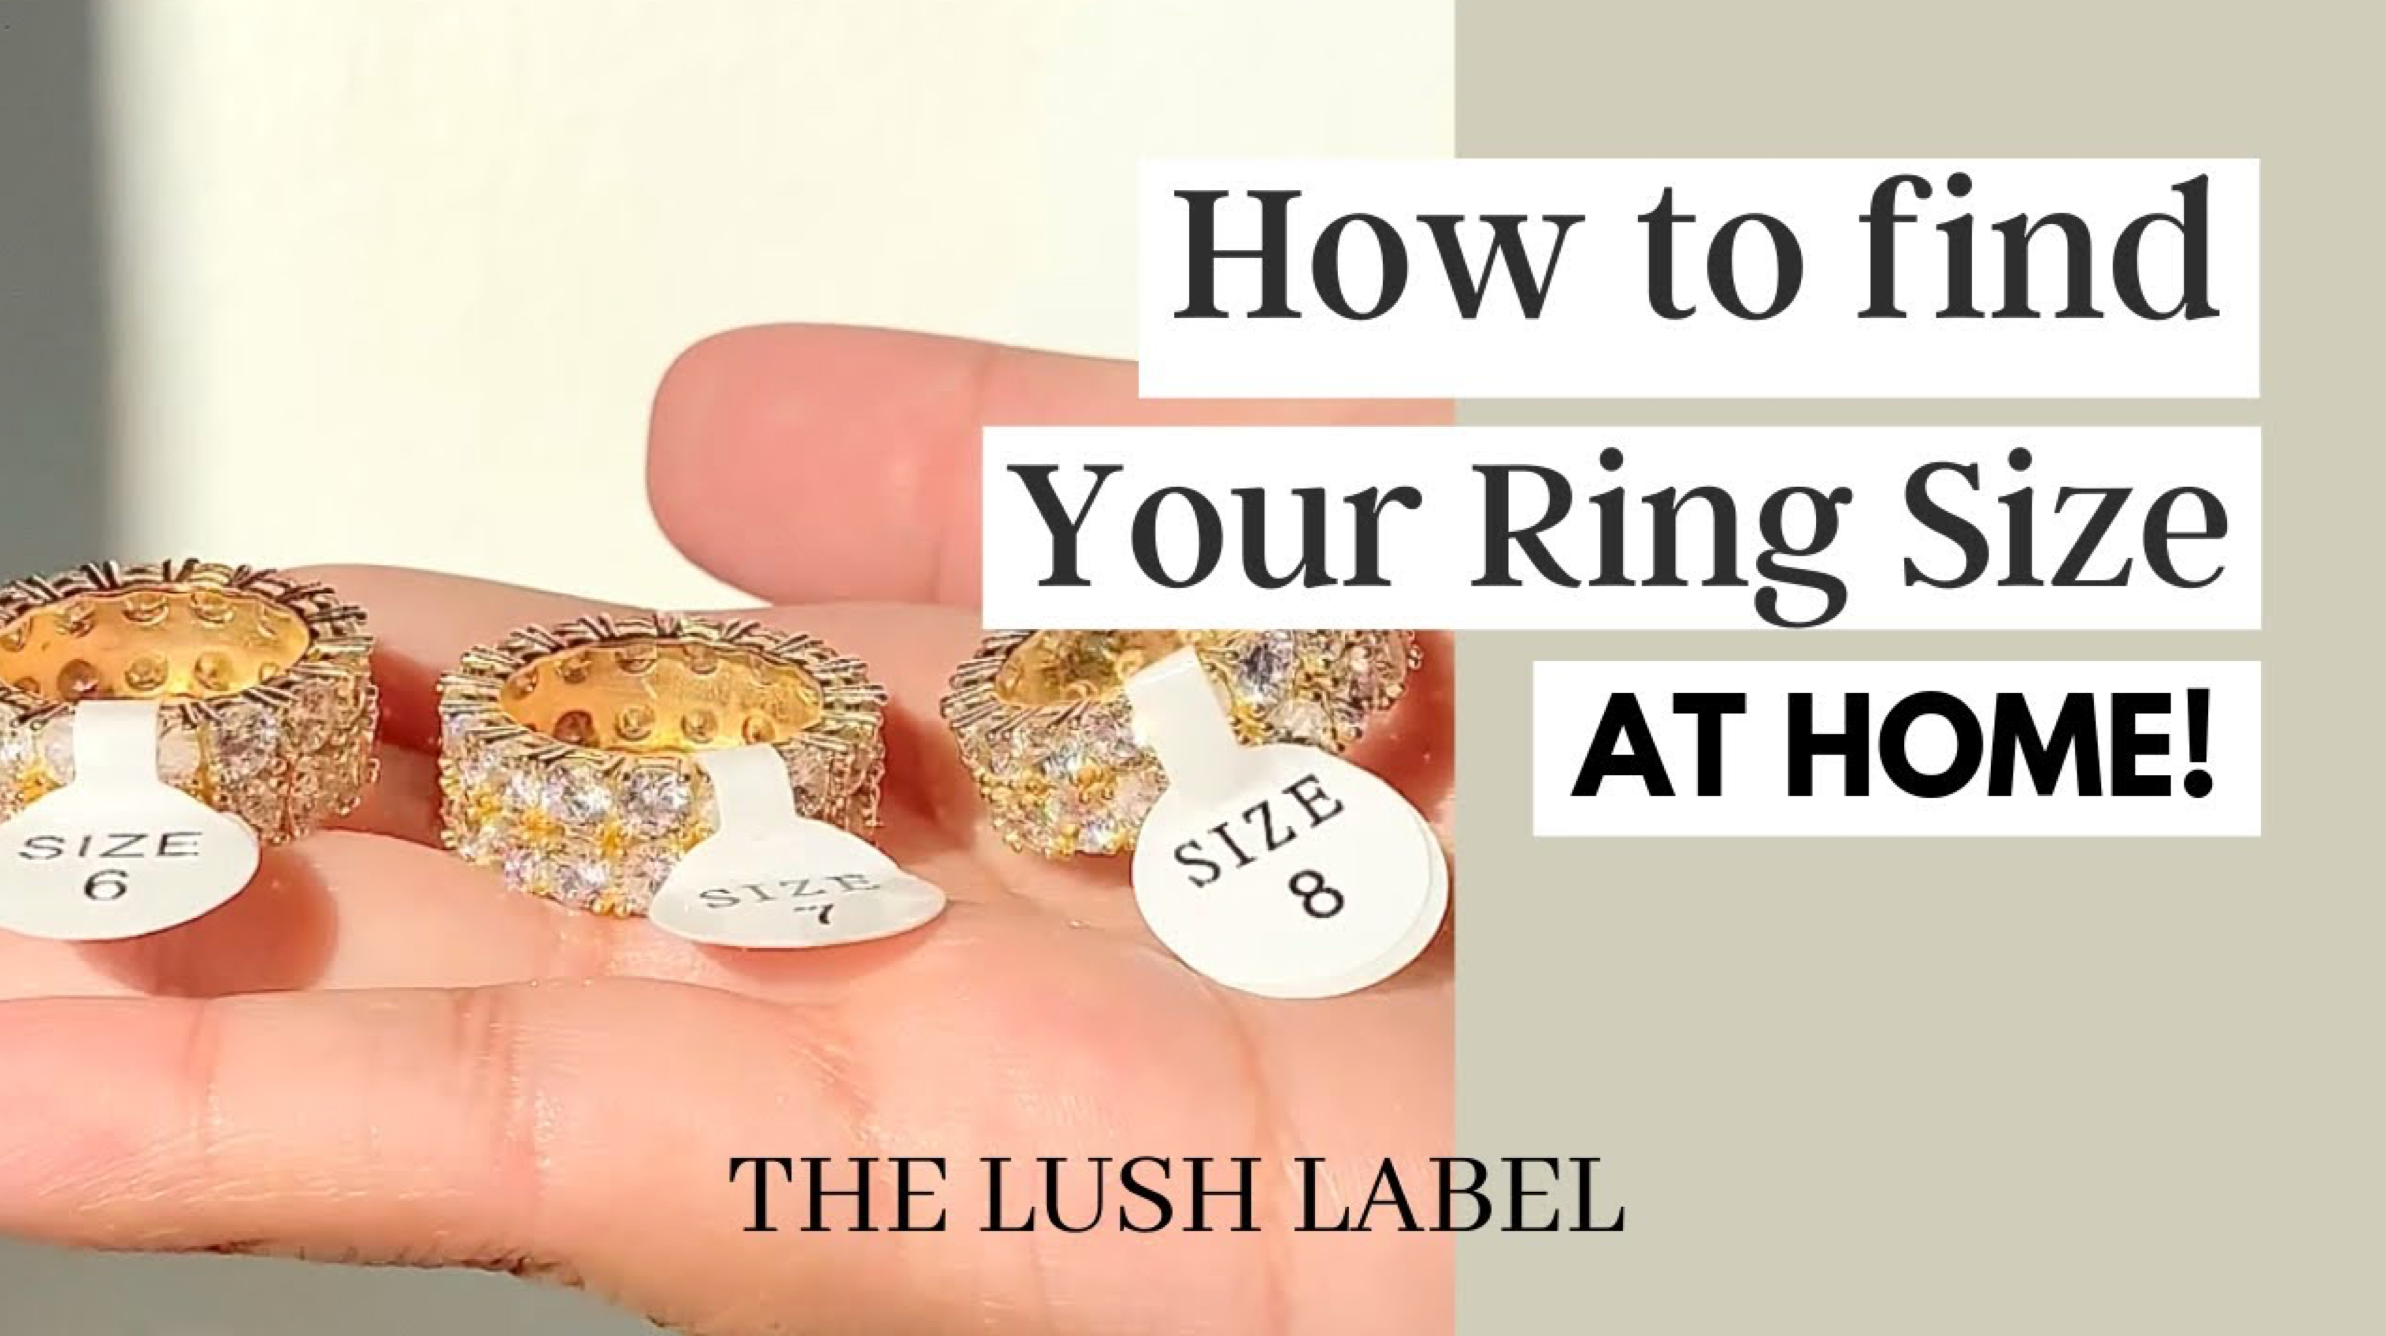 HOW TO FIND YOUR RING SIZE AT HOME! (HACK)